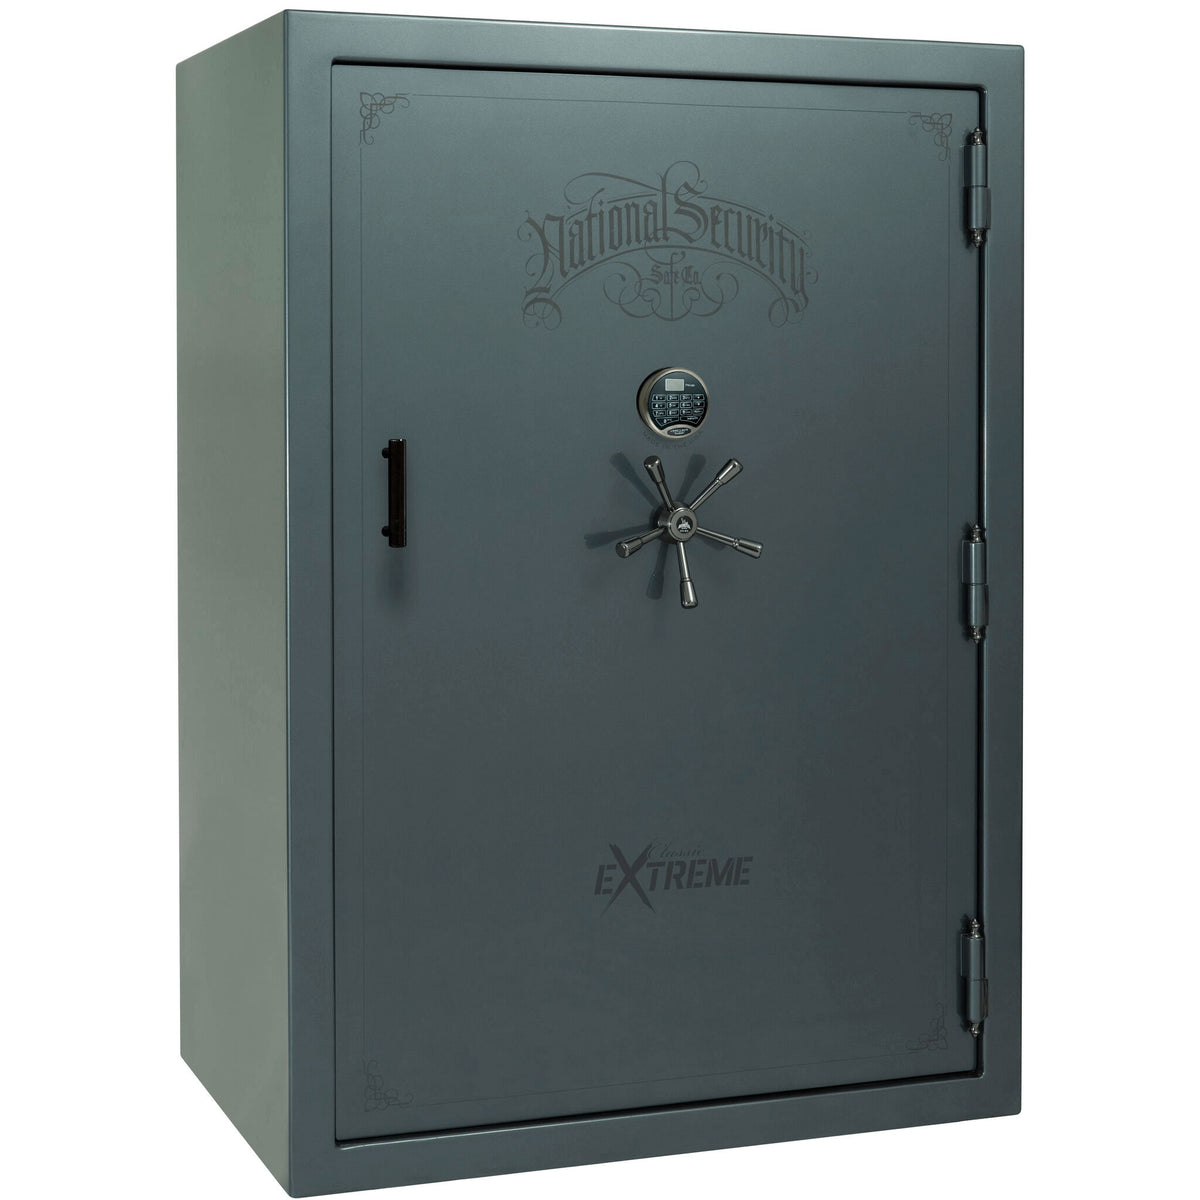 Liberty Classic Select Extreme Wide Body Safe in Forest Mist Gloss with Black Chrome Electronic Lock.